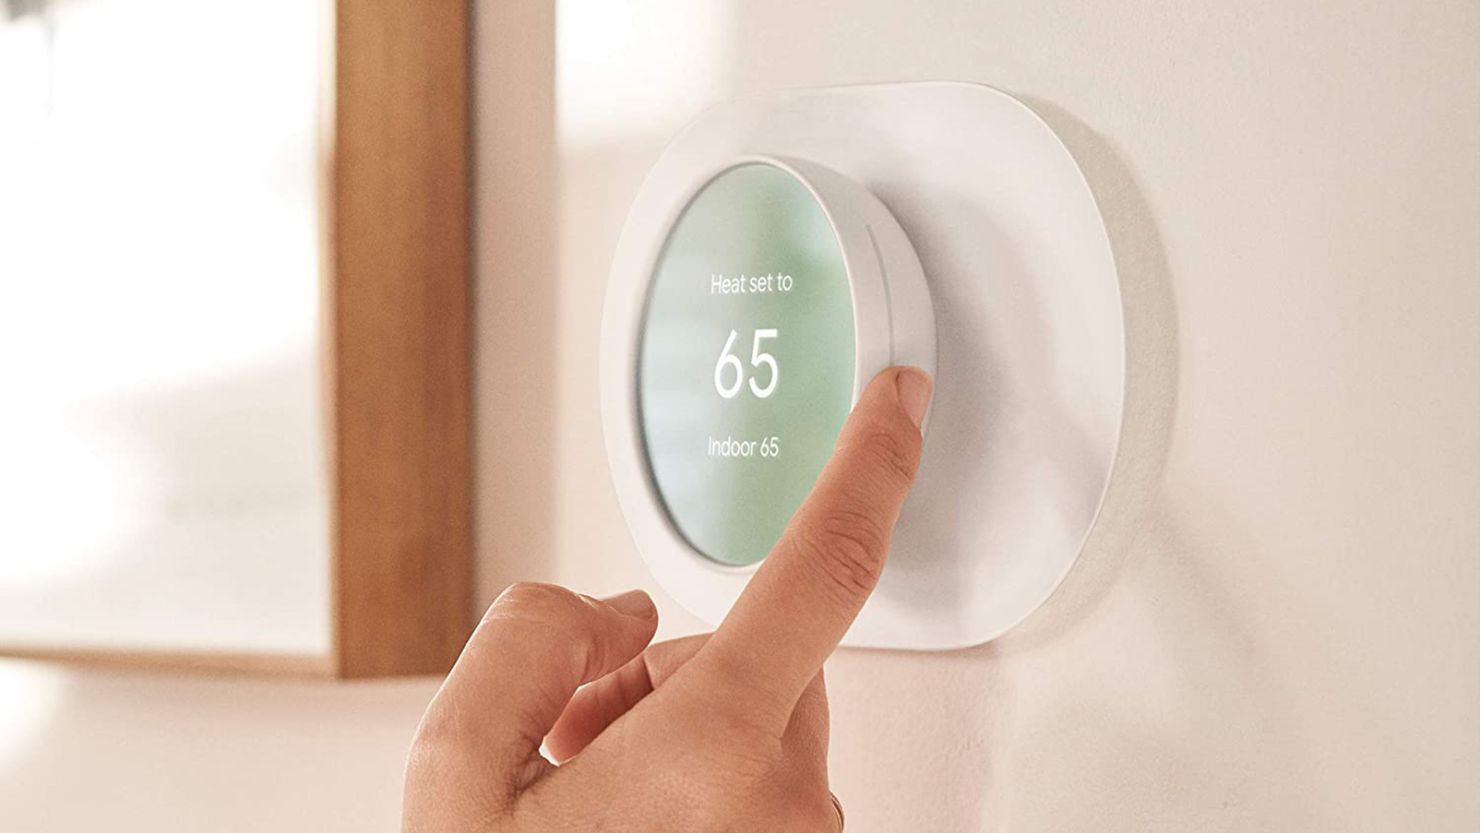 Google Nest smart thermostat sale: Up to 32% off